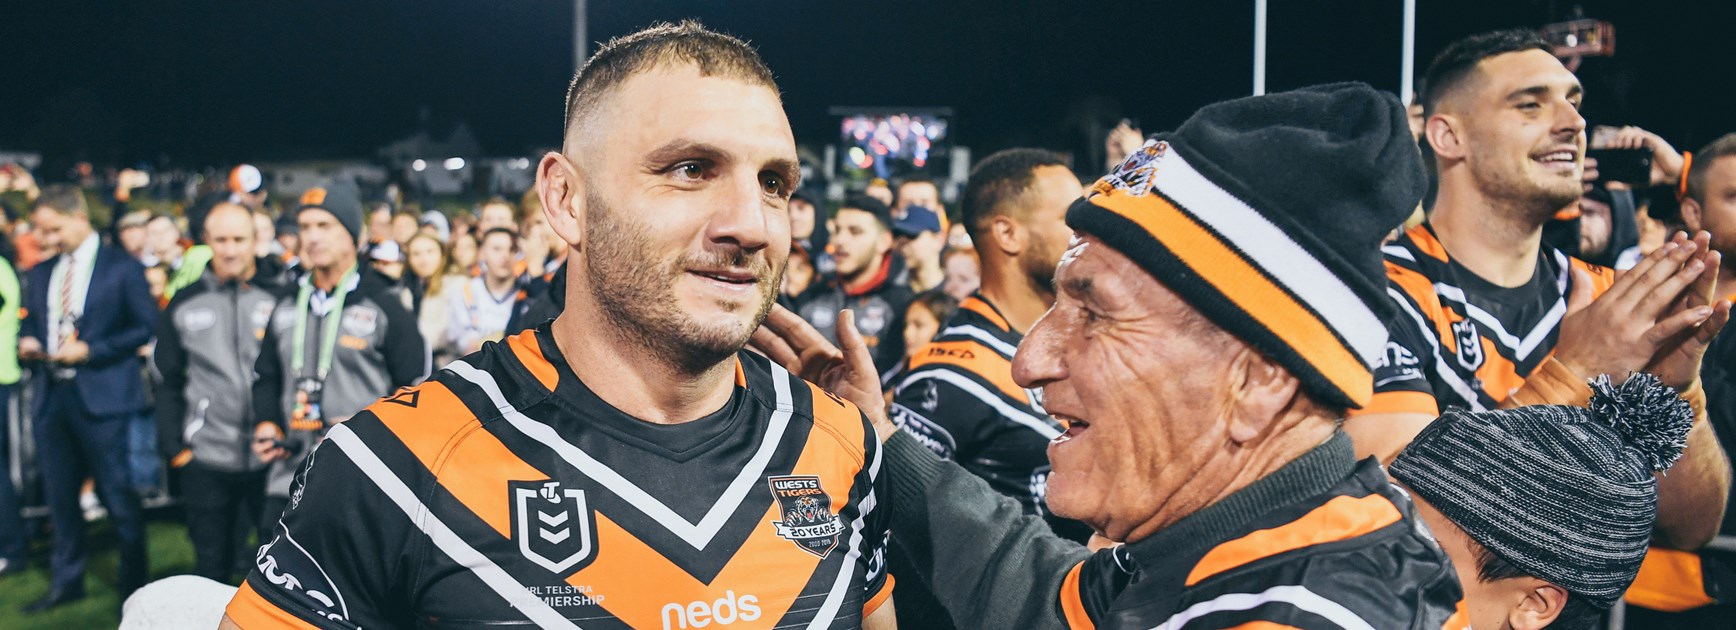 Wests Tigers Results: Round 20